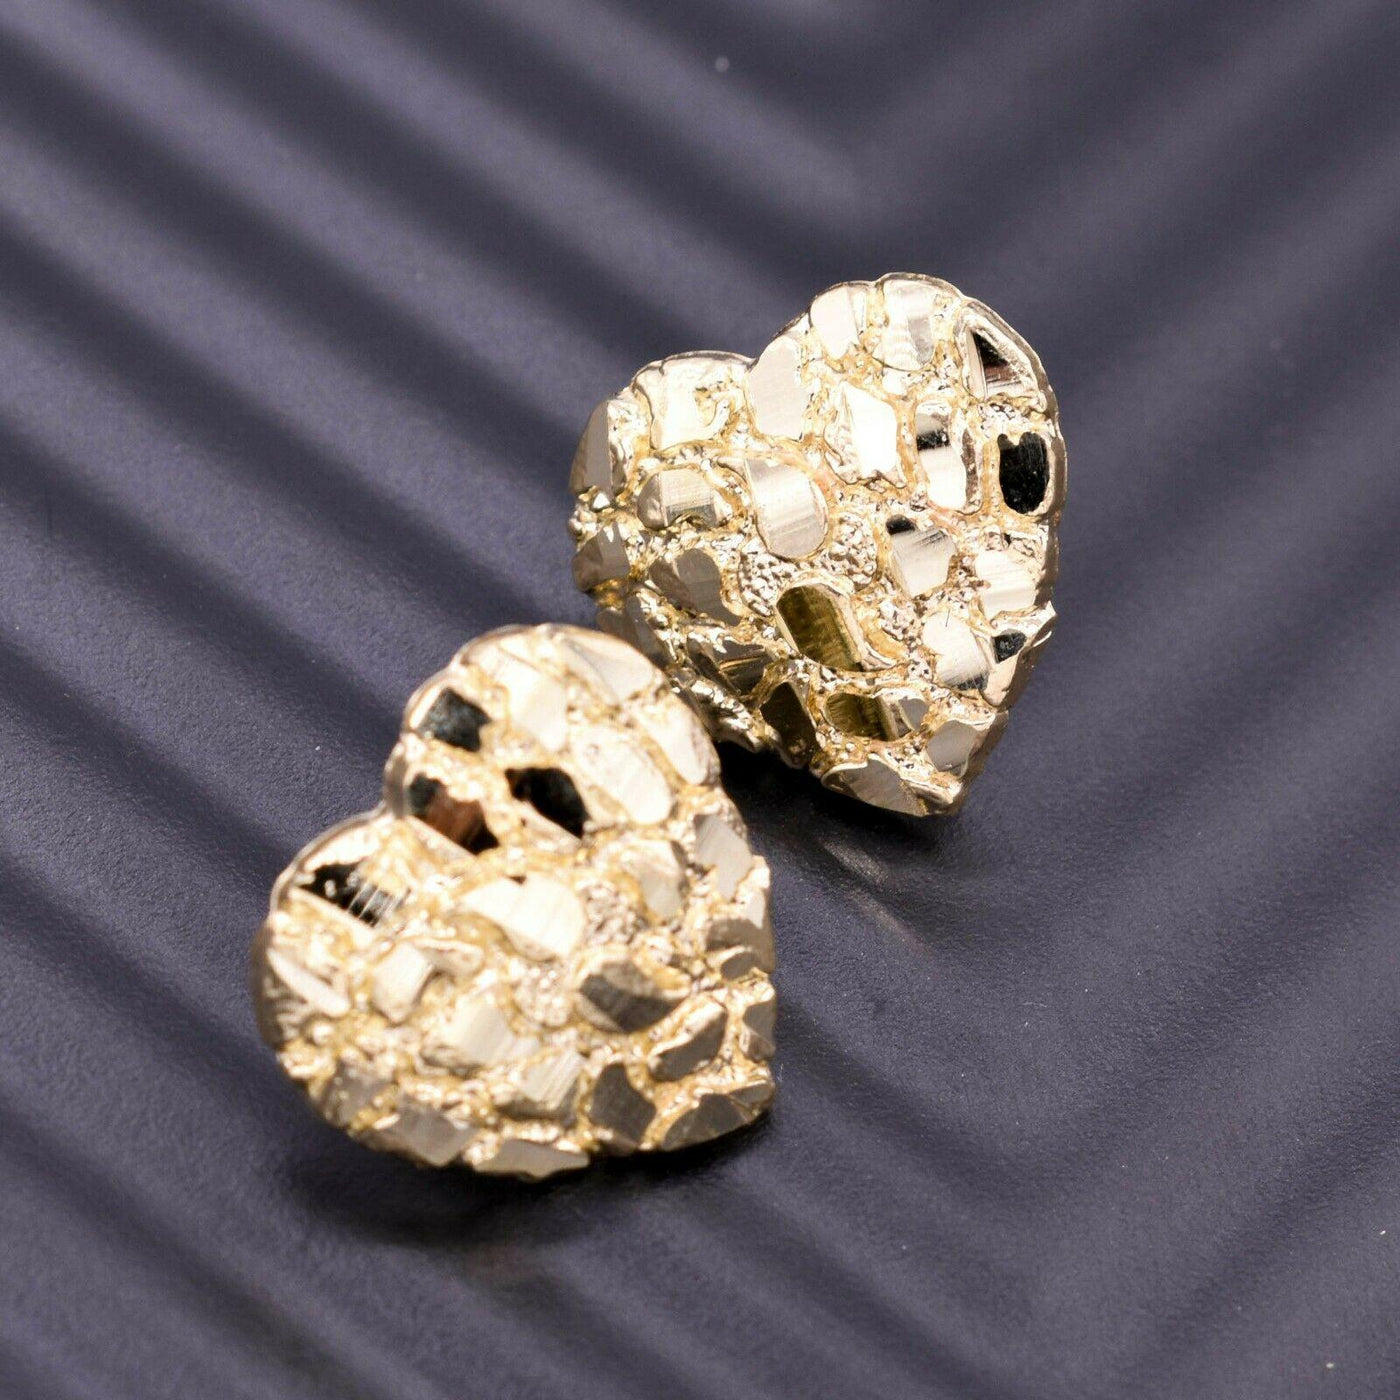 3/4" Heart Shaped Nugget Textured Stud Earrings Solid 10K Yellow Gold - bayamjewelry